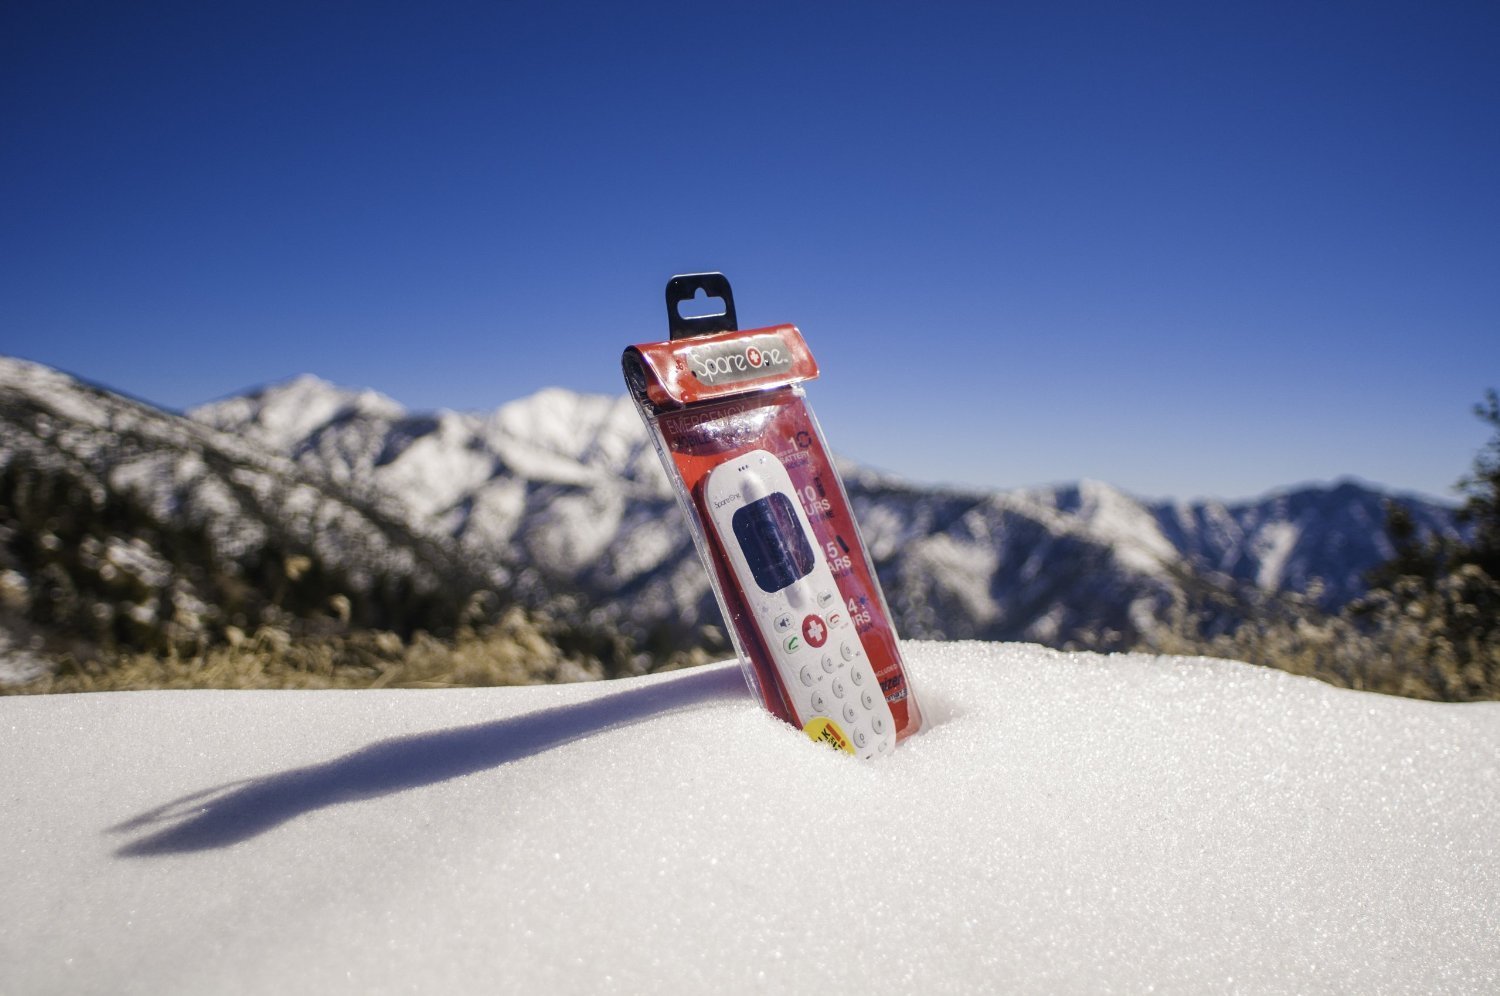 Be Ready For Anything With The SpareOne Plus Emergency Phone